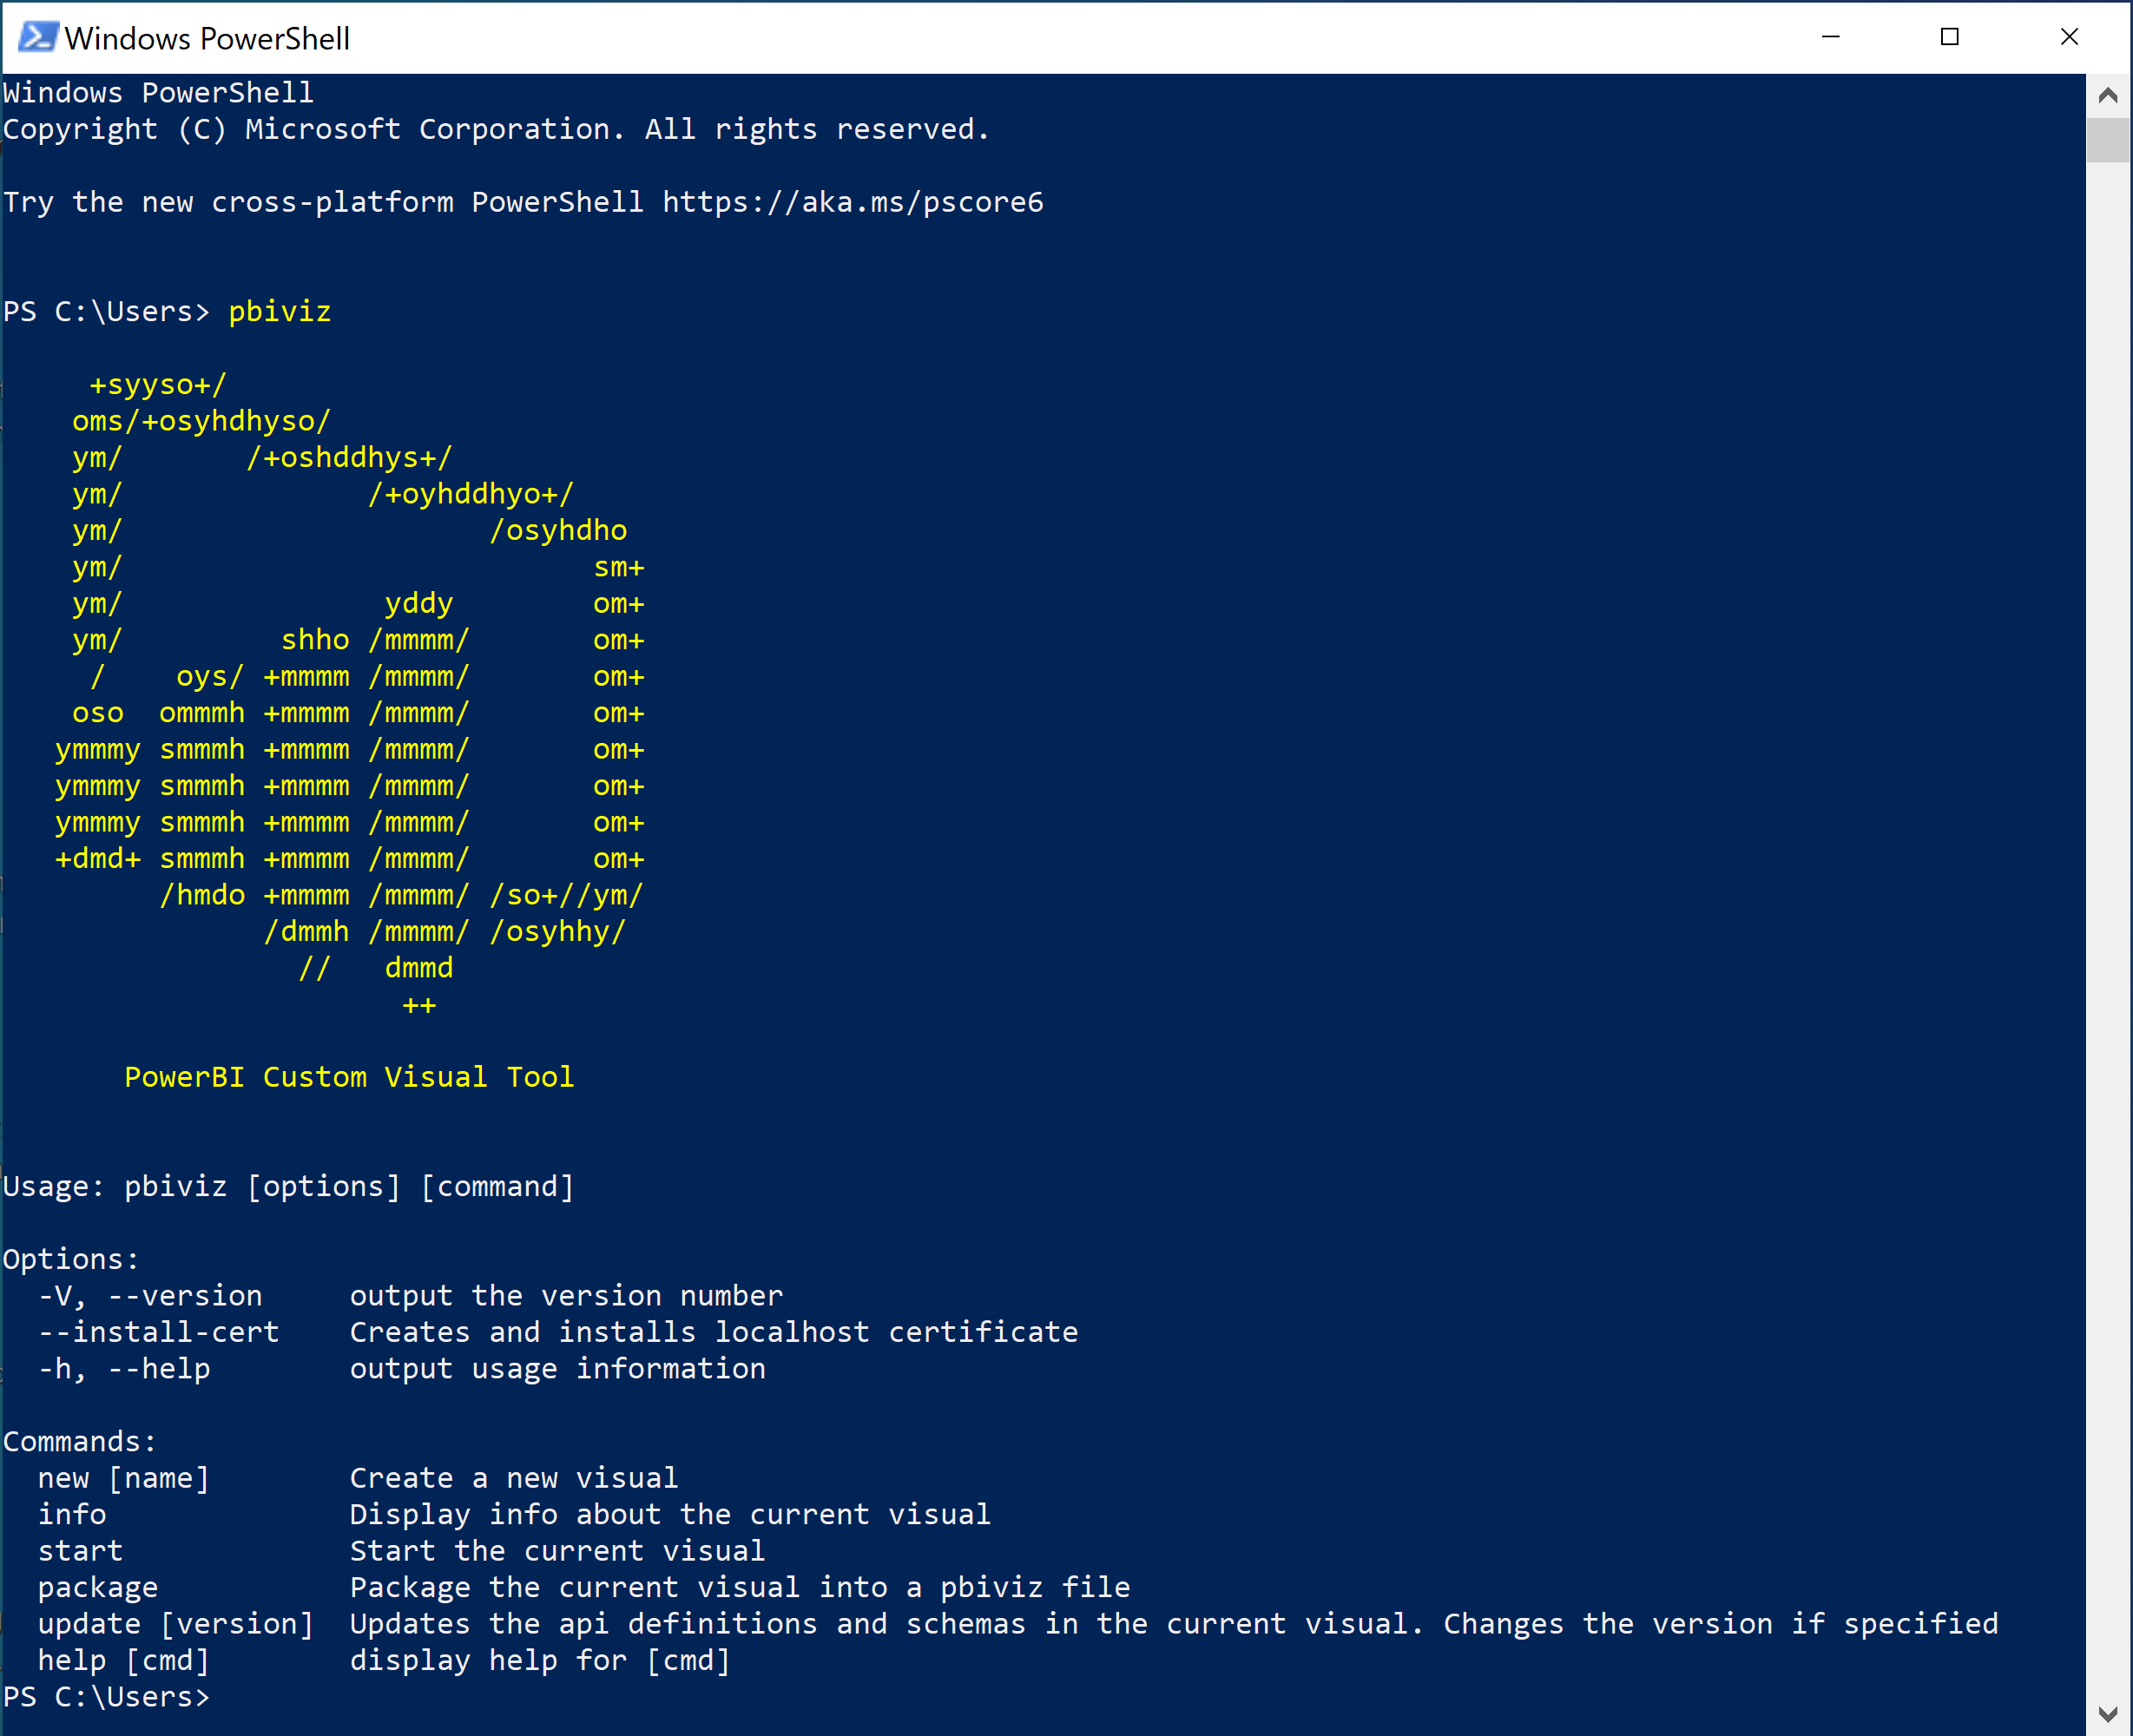 Screenshot of the output of executing the command p b i viz in PowerShell.